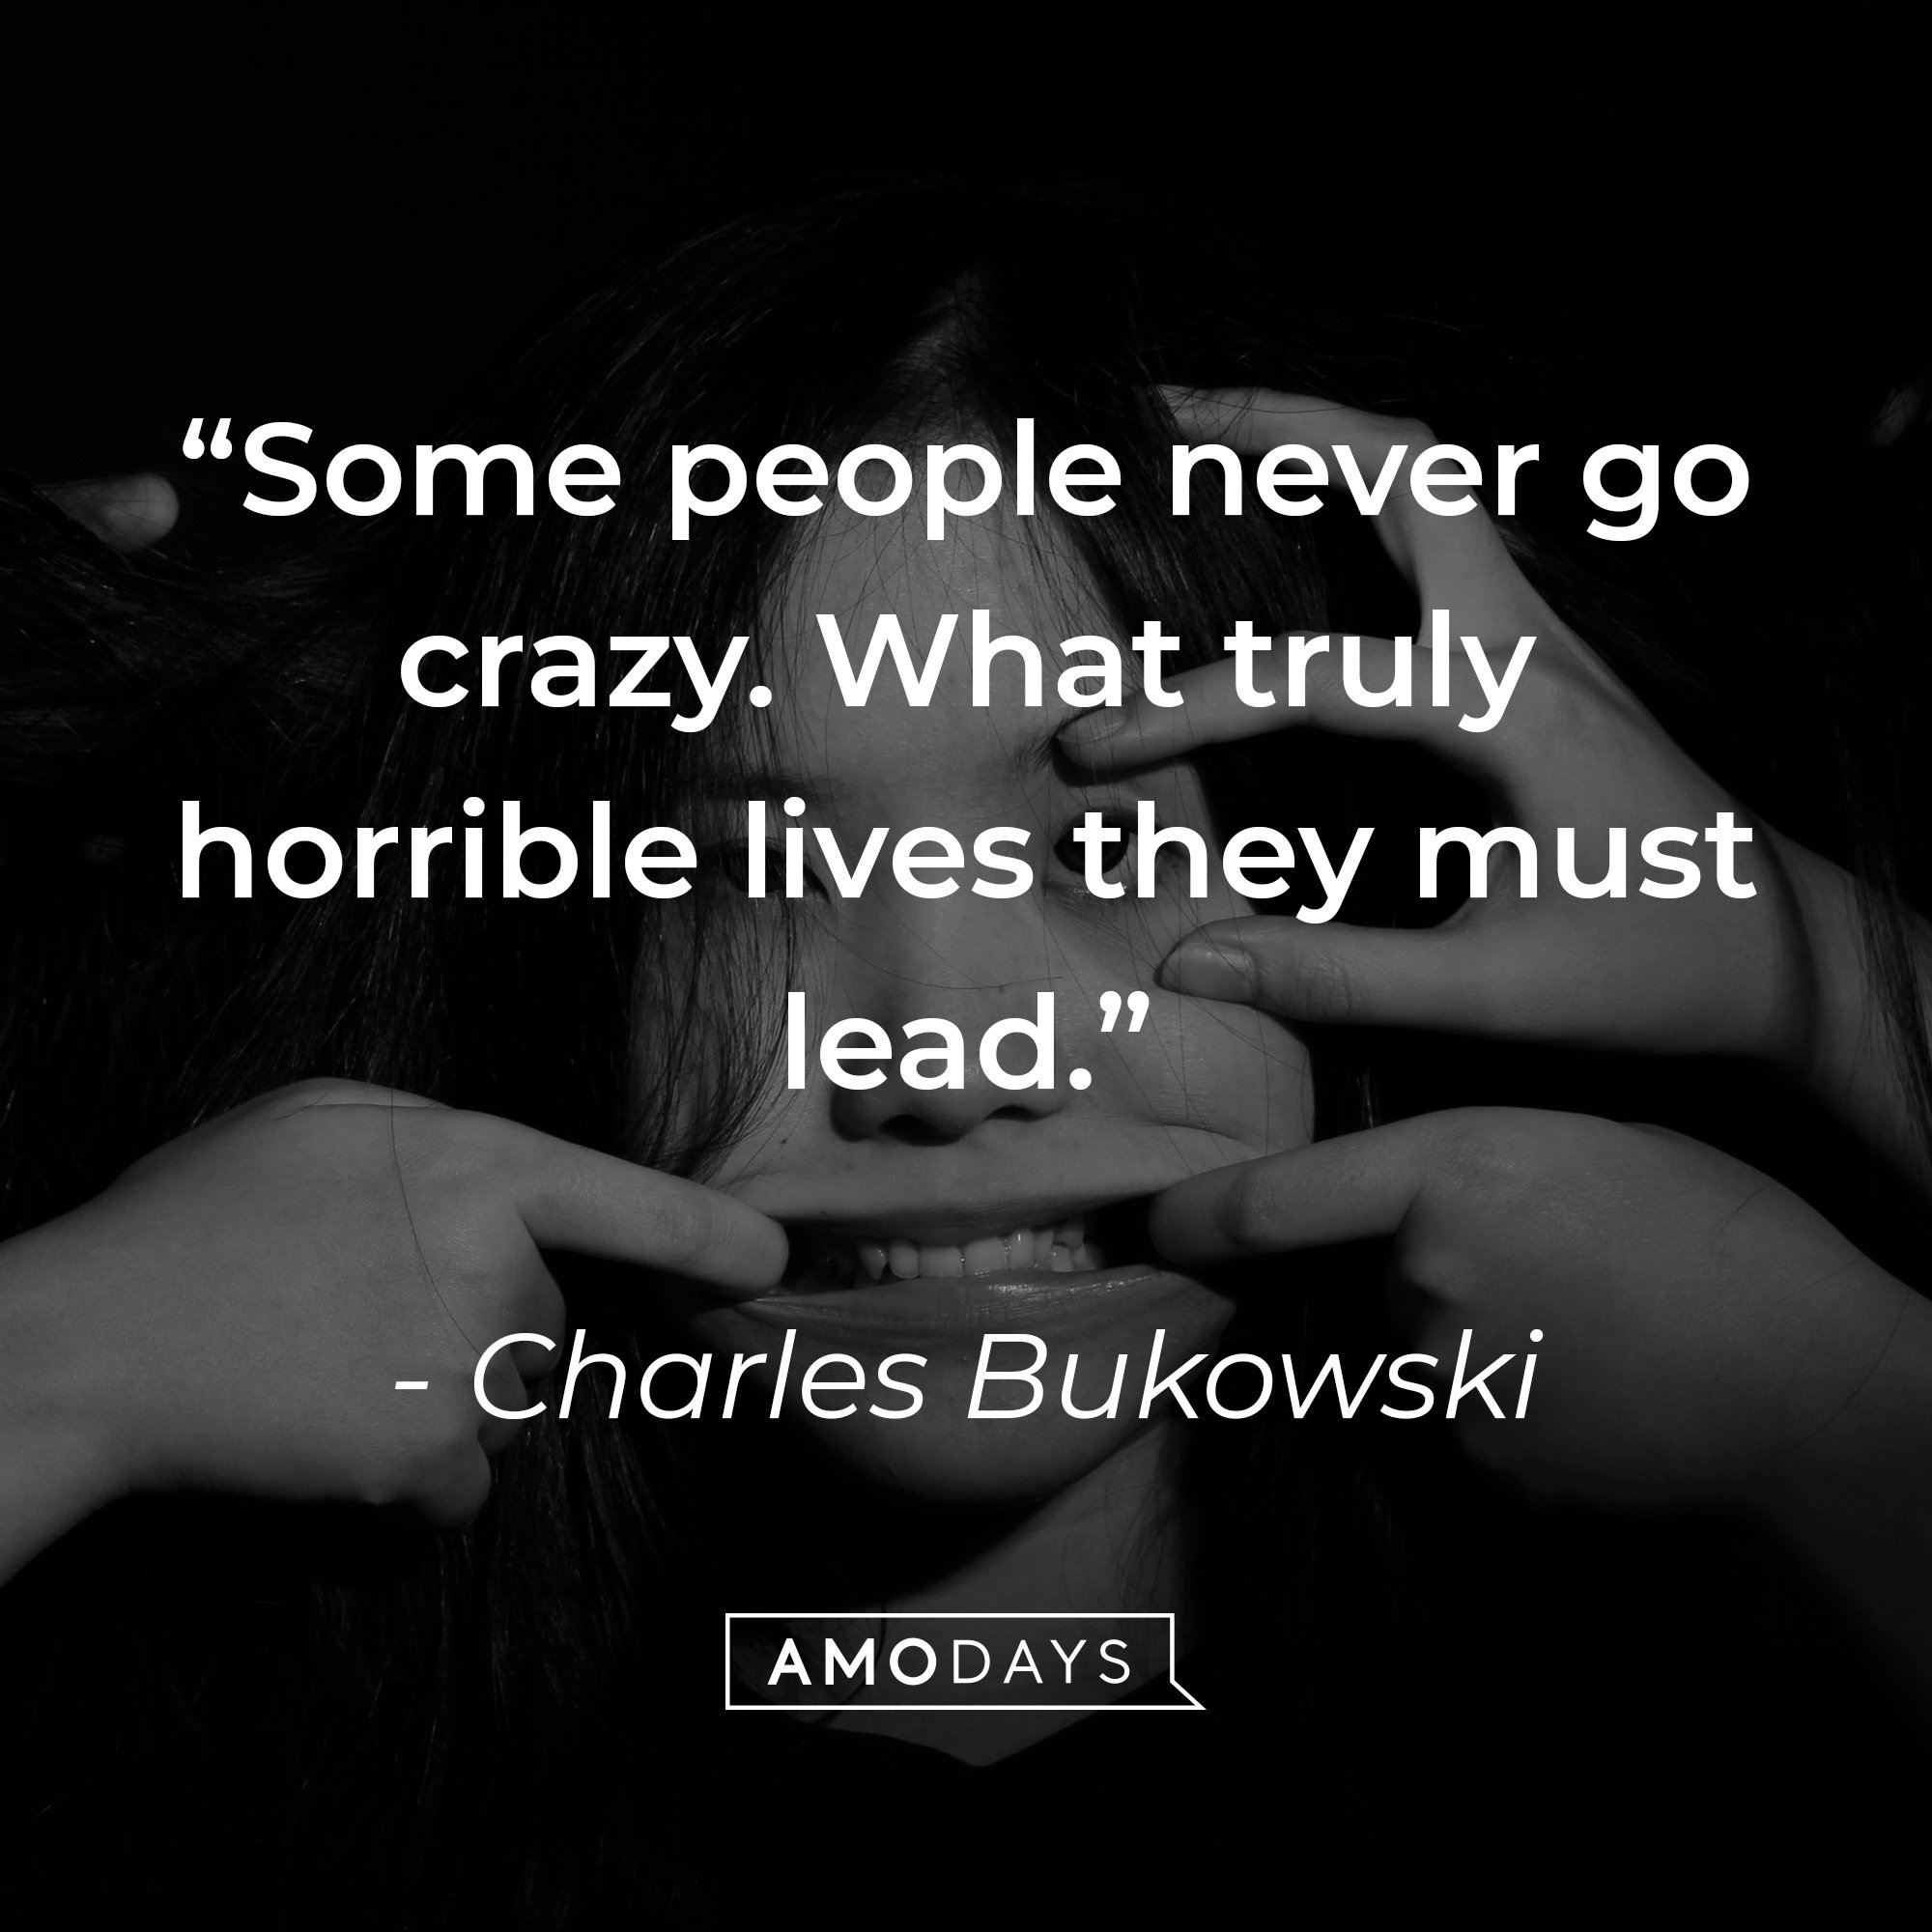  Charles Bukowski’s quote: “Some people never go crazy. What truly horrible lives they must lead.” | Image: Amodays